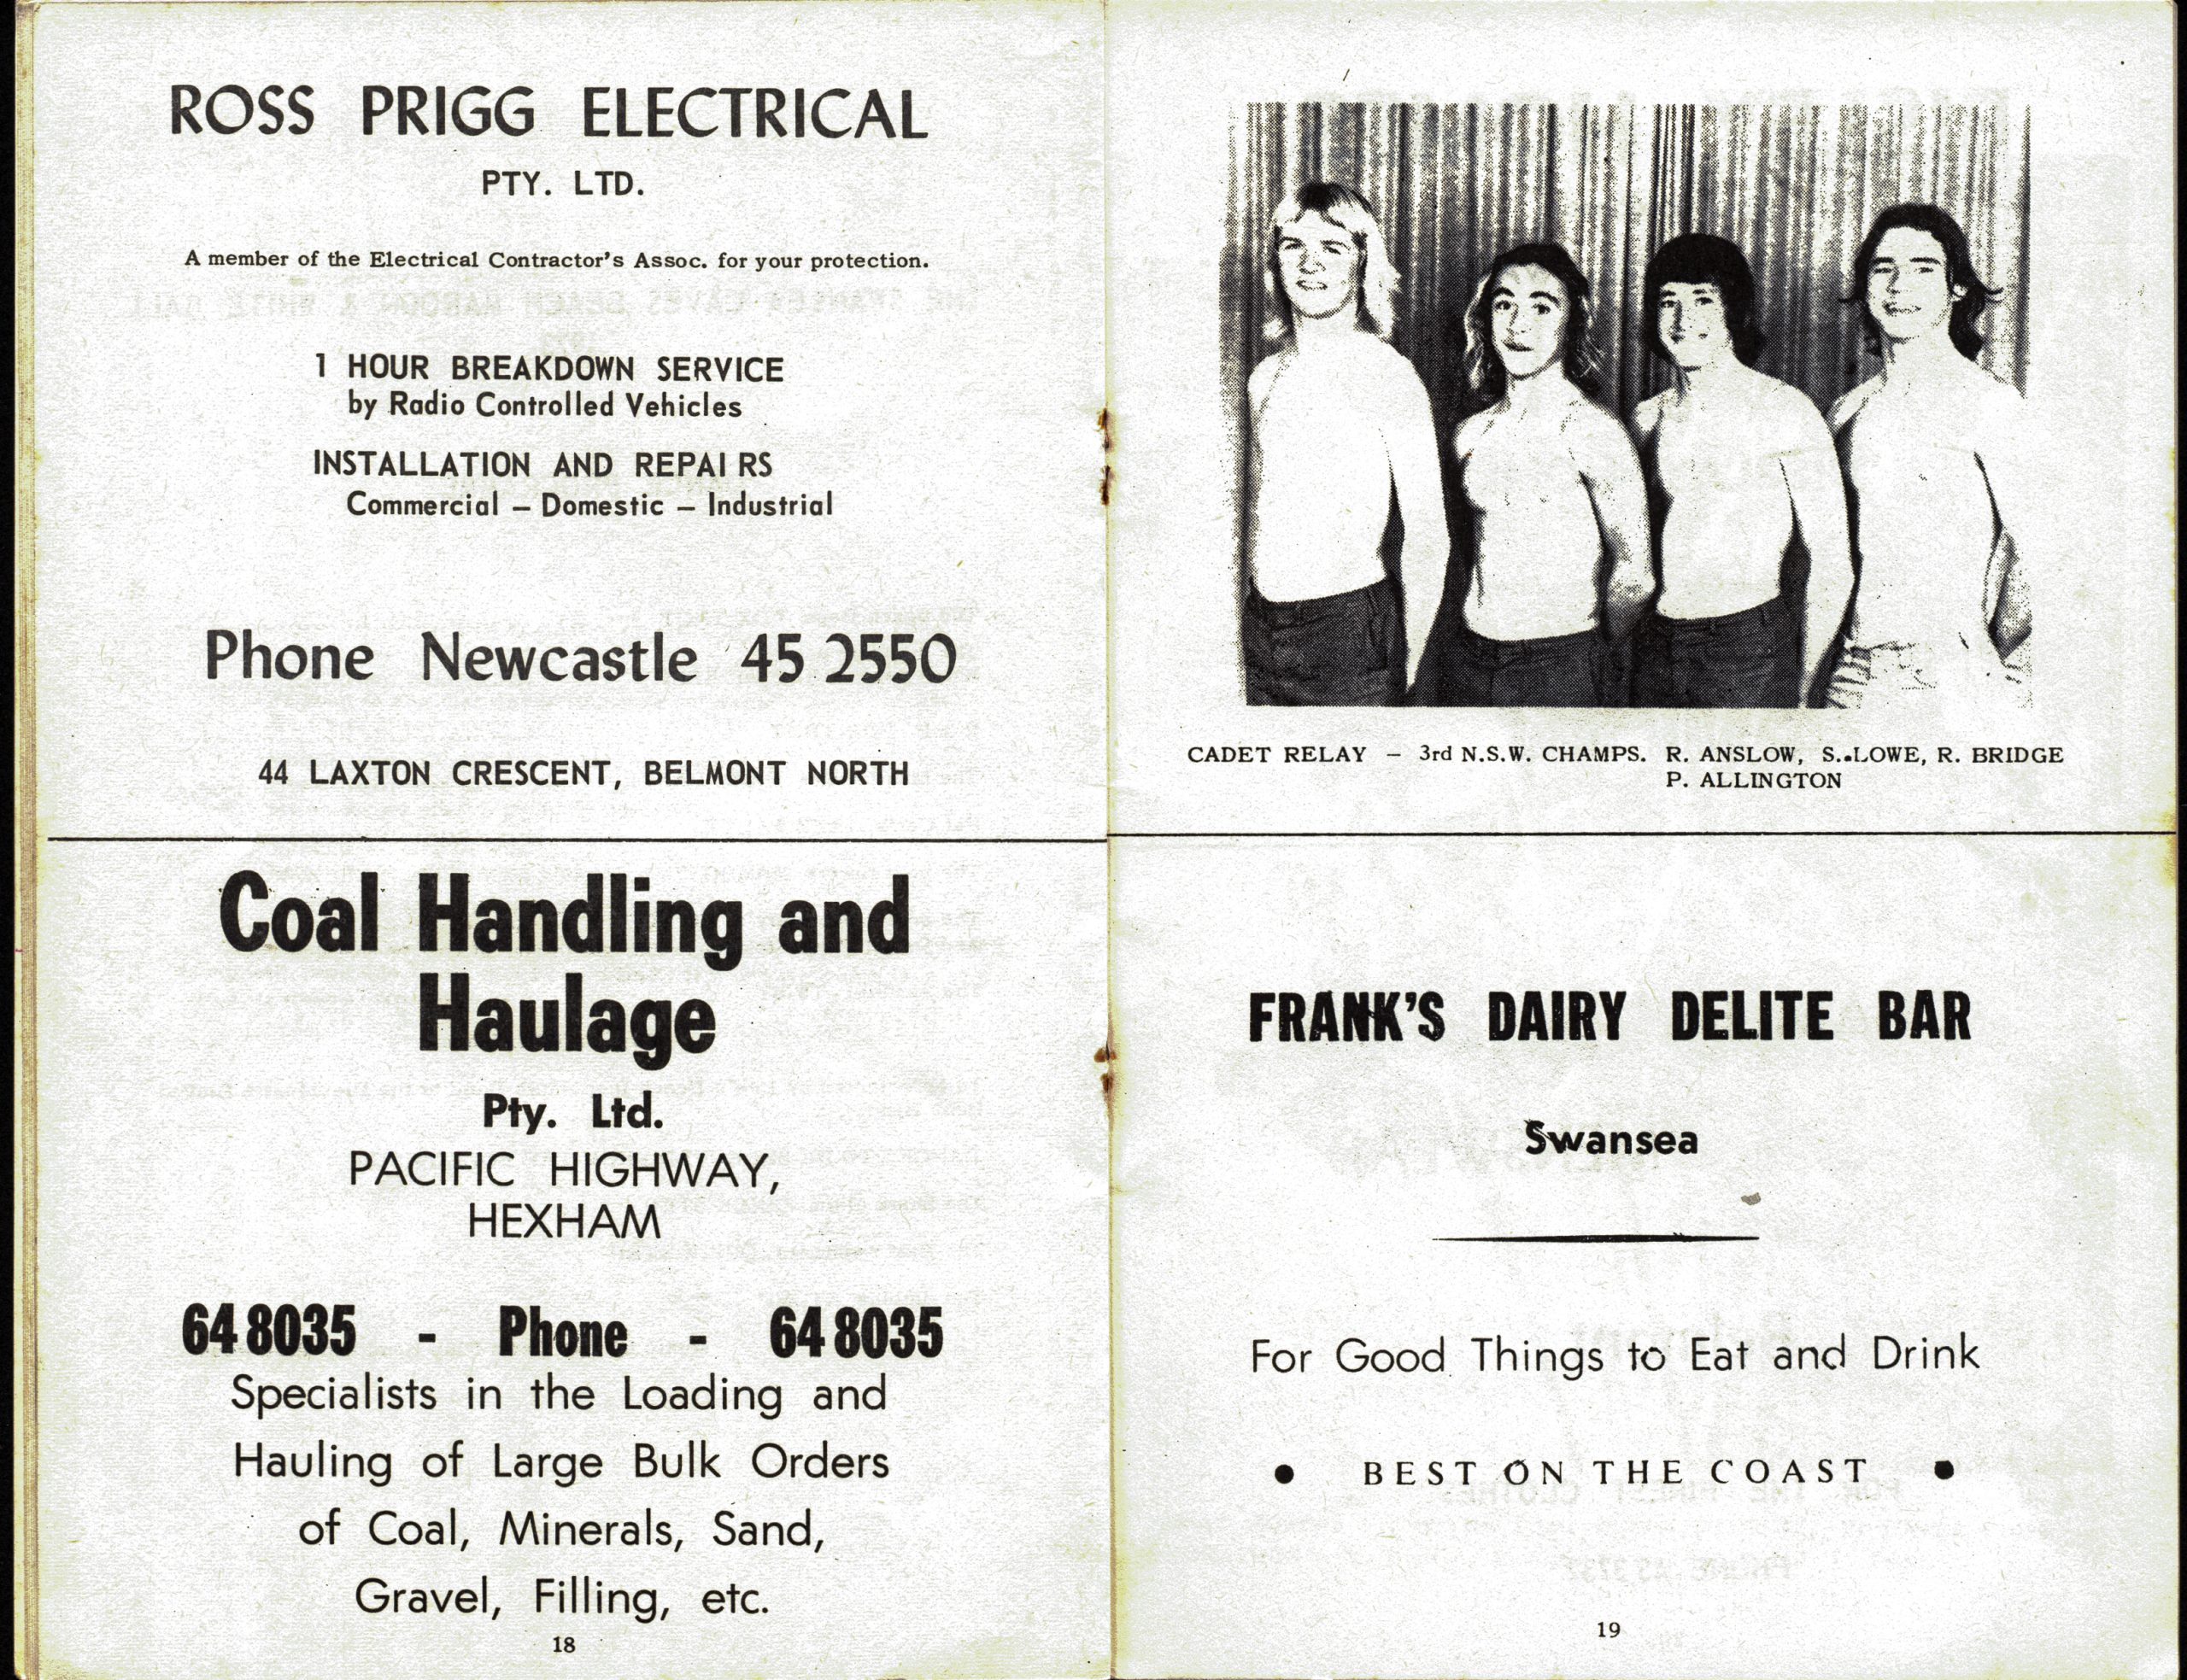 Programme pages with local advertisements followed by a black and white photograph of four, shirtless swim cadets with longer, surfer hair.